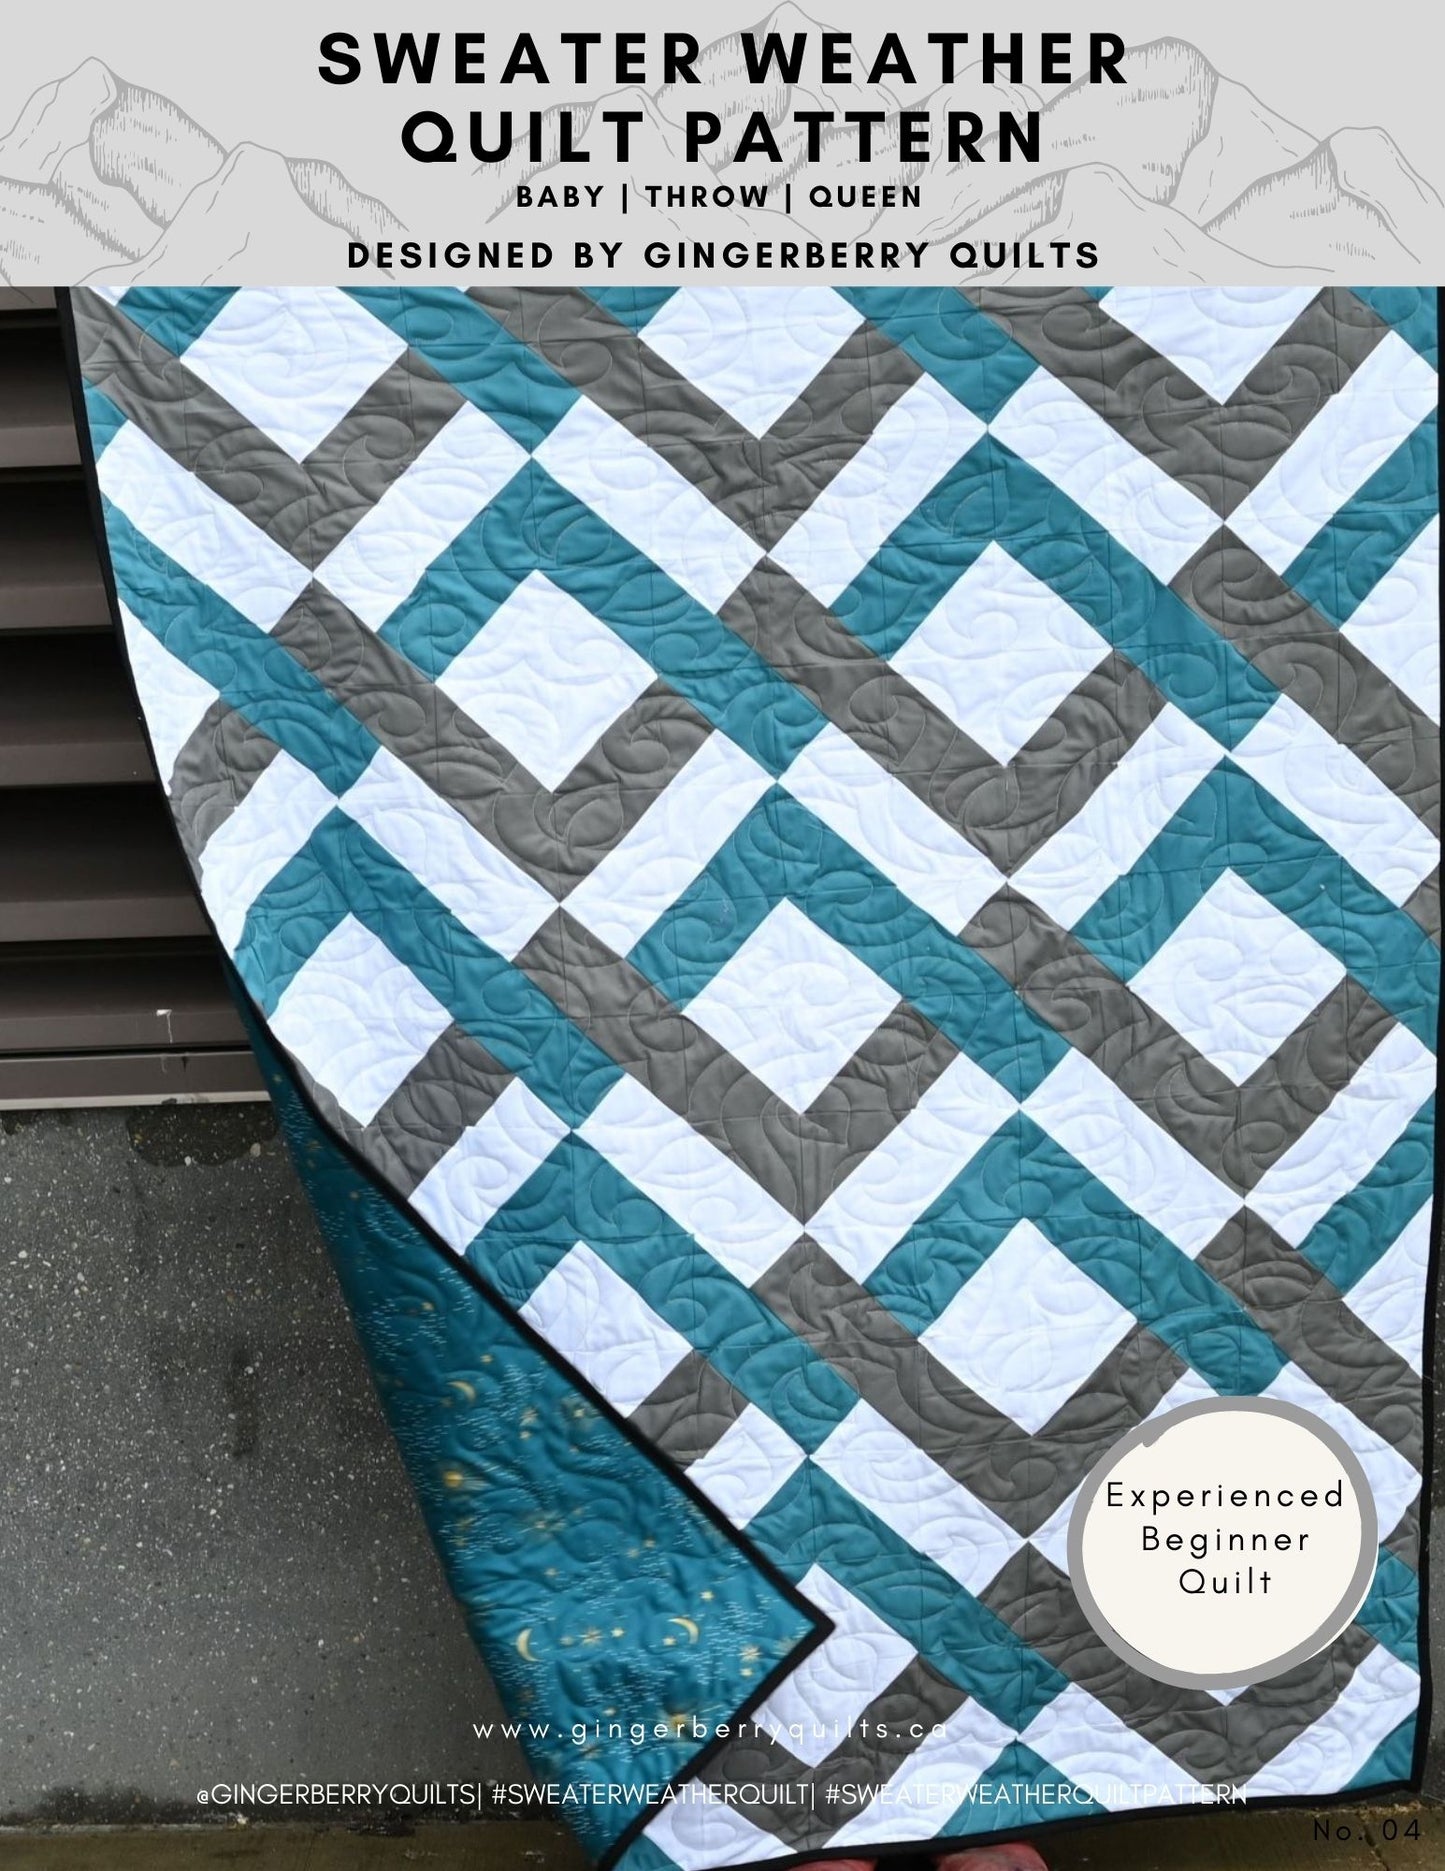 Sweater Weather Quilt Pattern - Physical copy